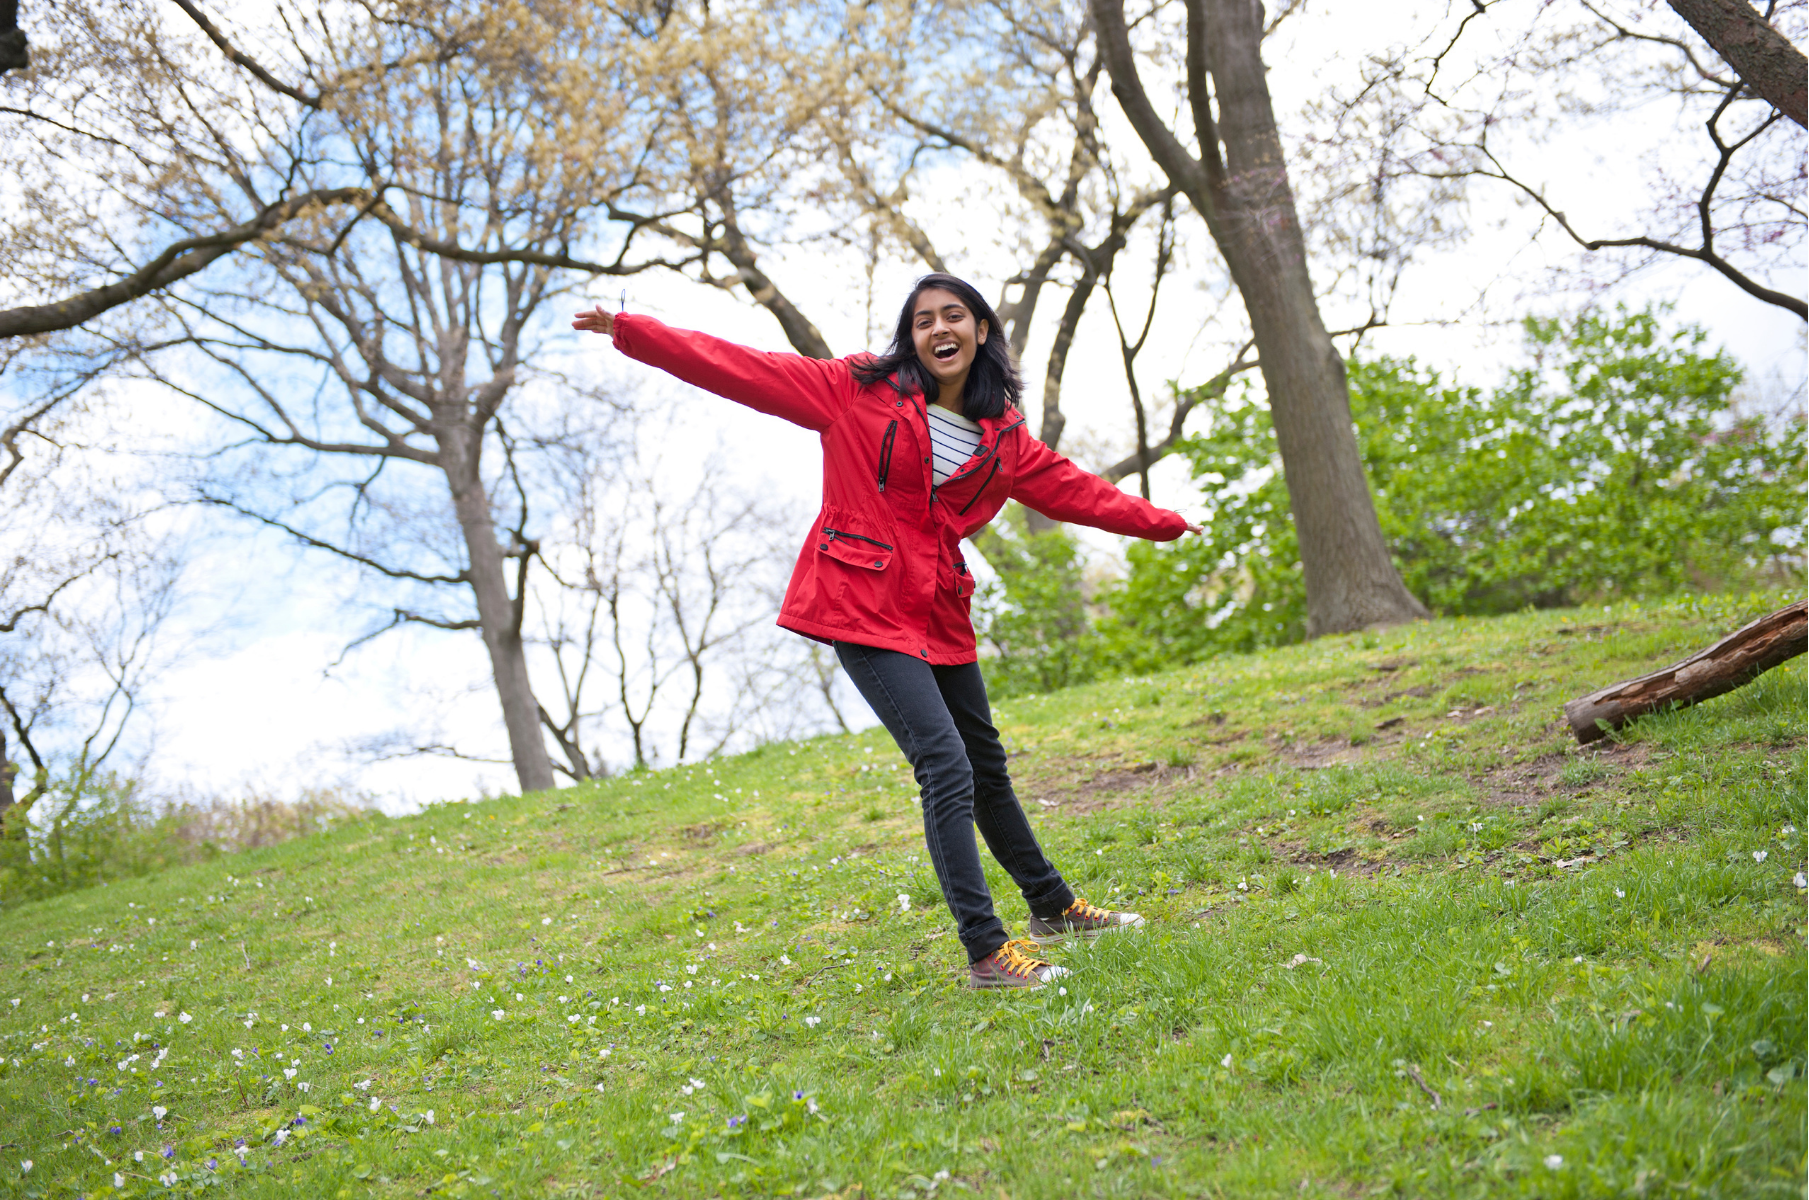 A tween or teen girl with dark hair and skin stands on a grassy hill wearing a red coat and jeans and extending her arms wide in gratitude.